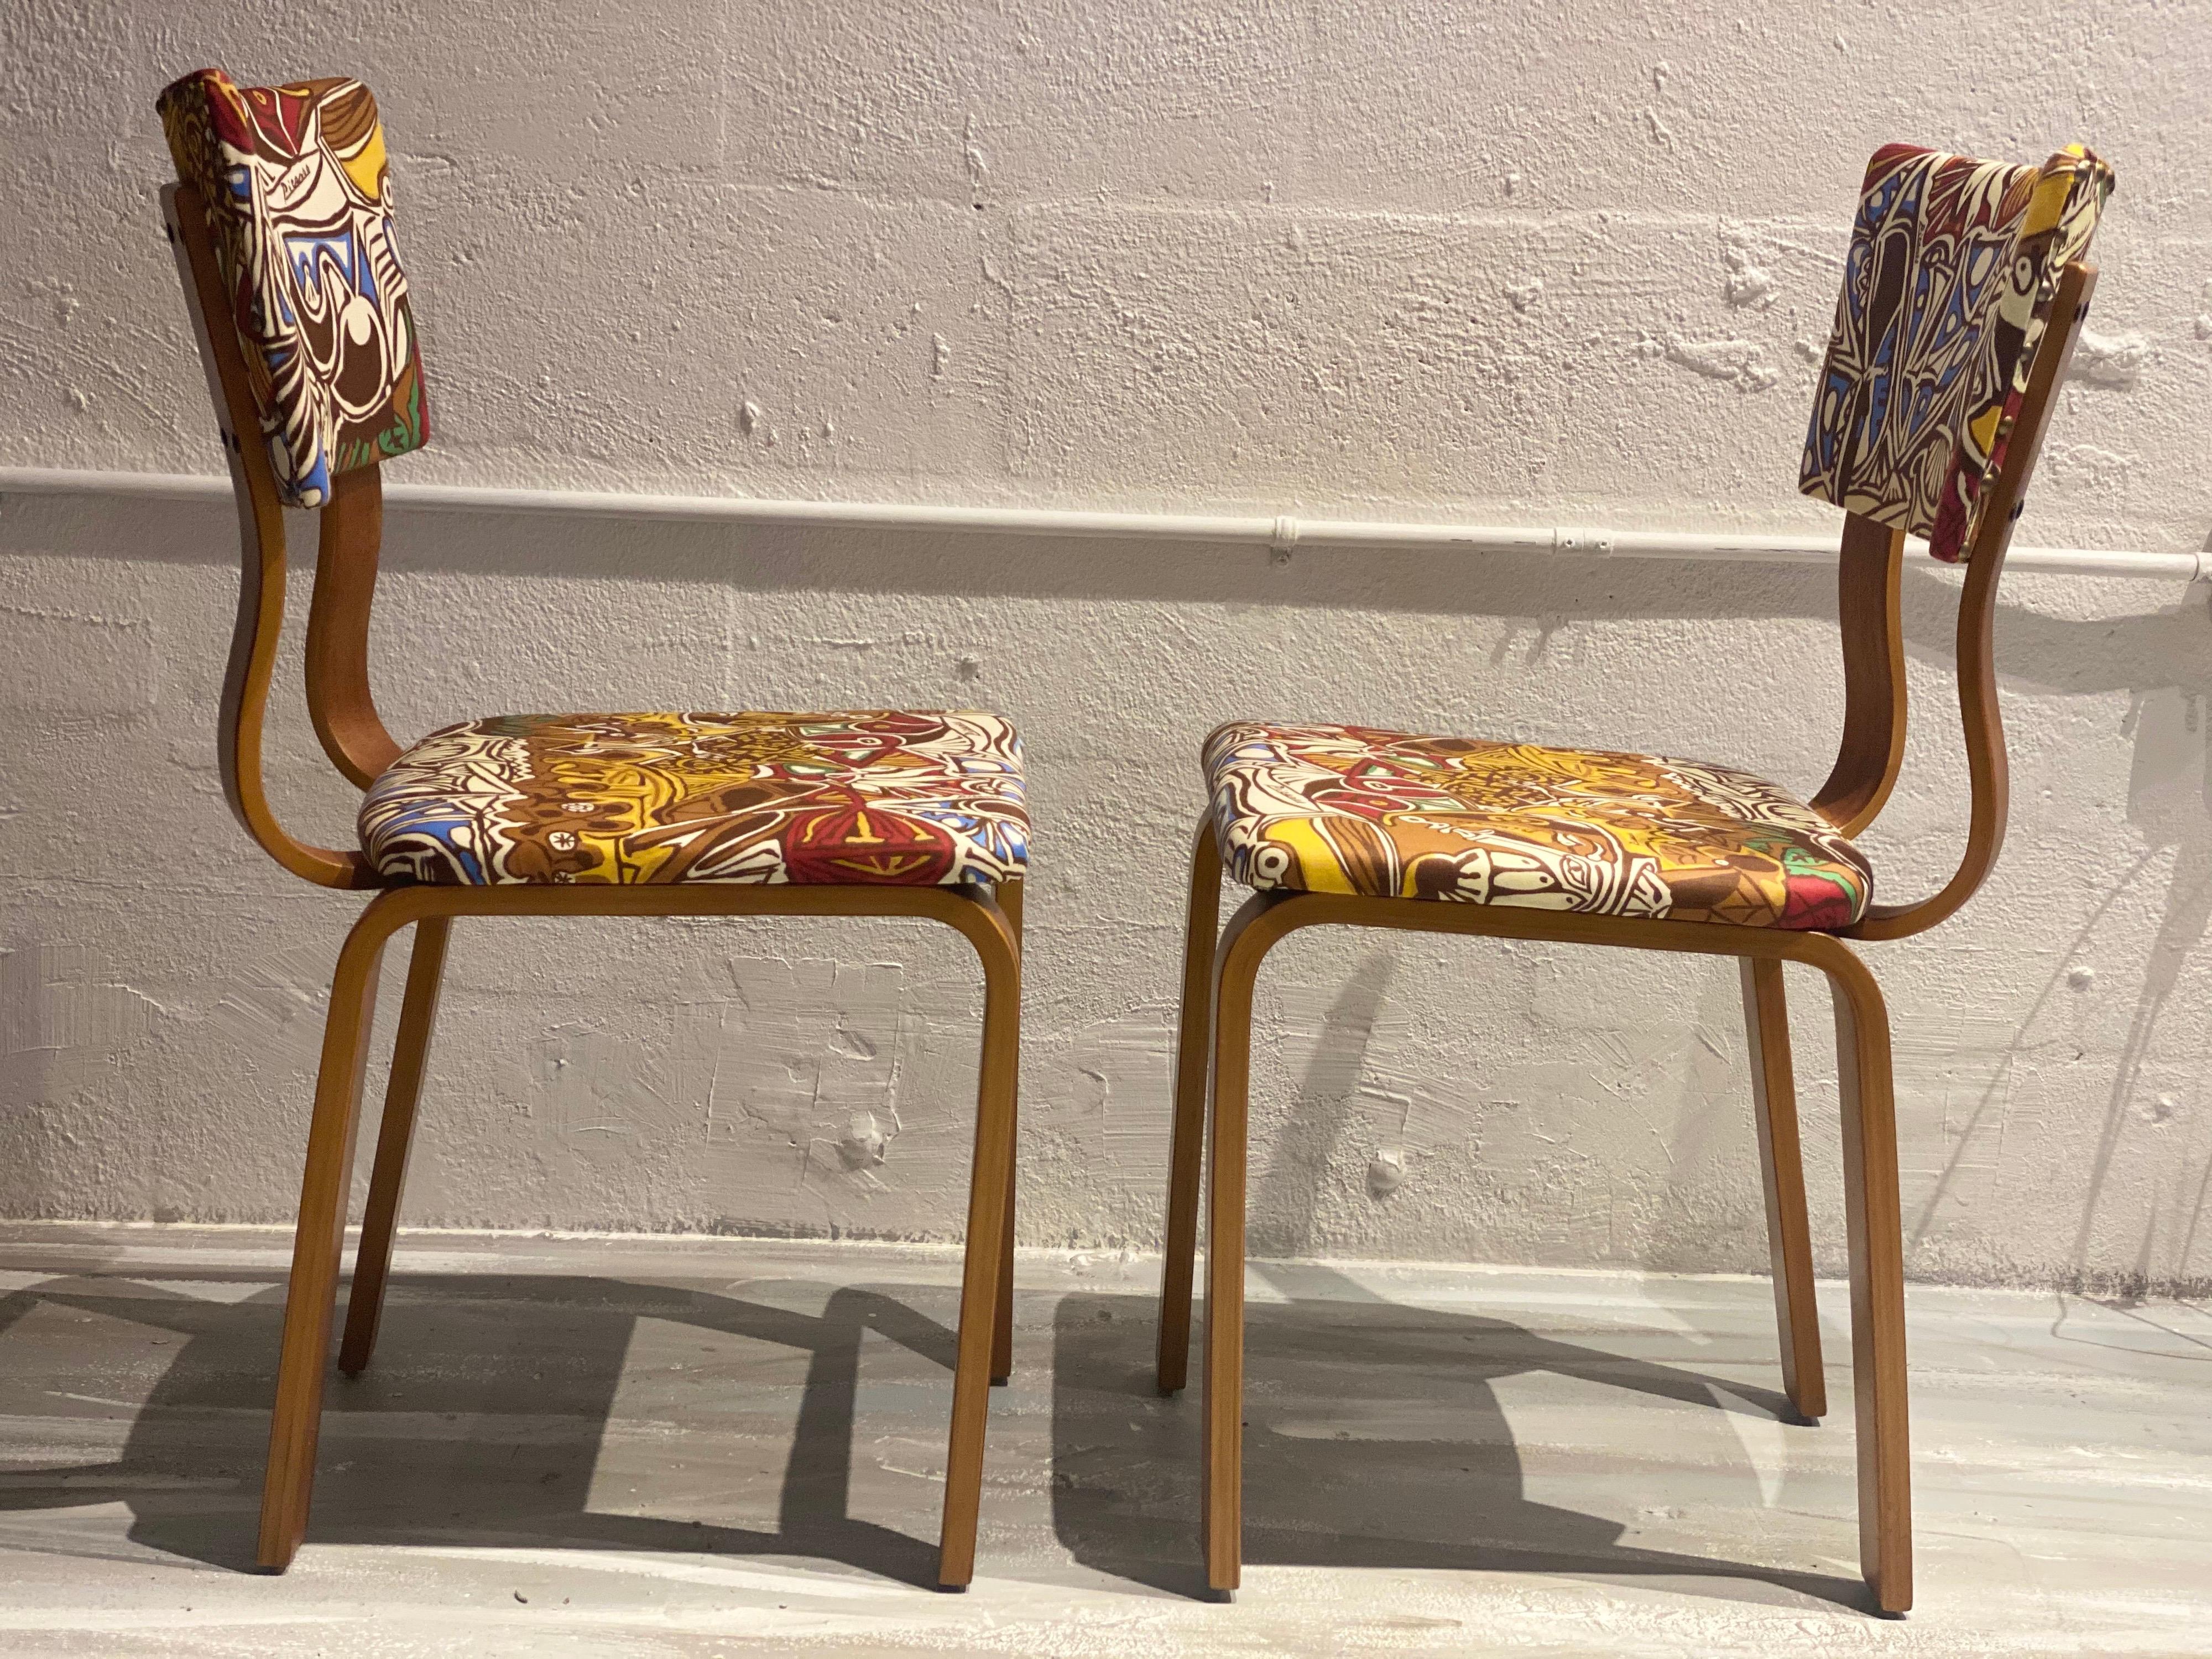 Midcentury Thonet Bentwood Side Chairs with Pablo Picasso LTD Edition Fabric For Sale 10